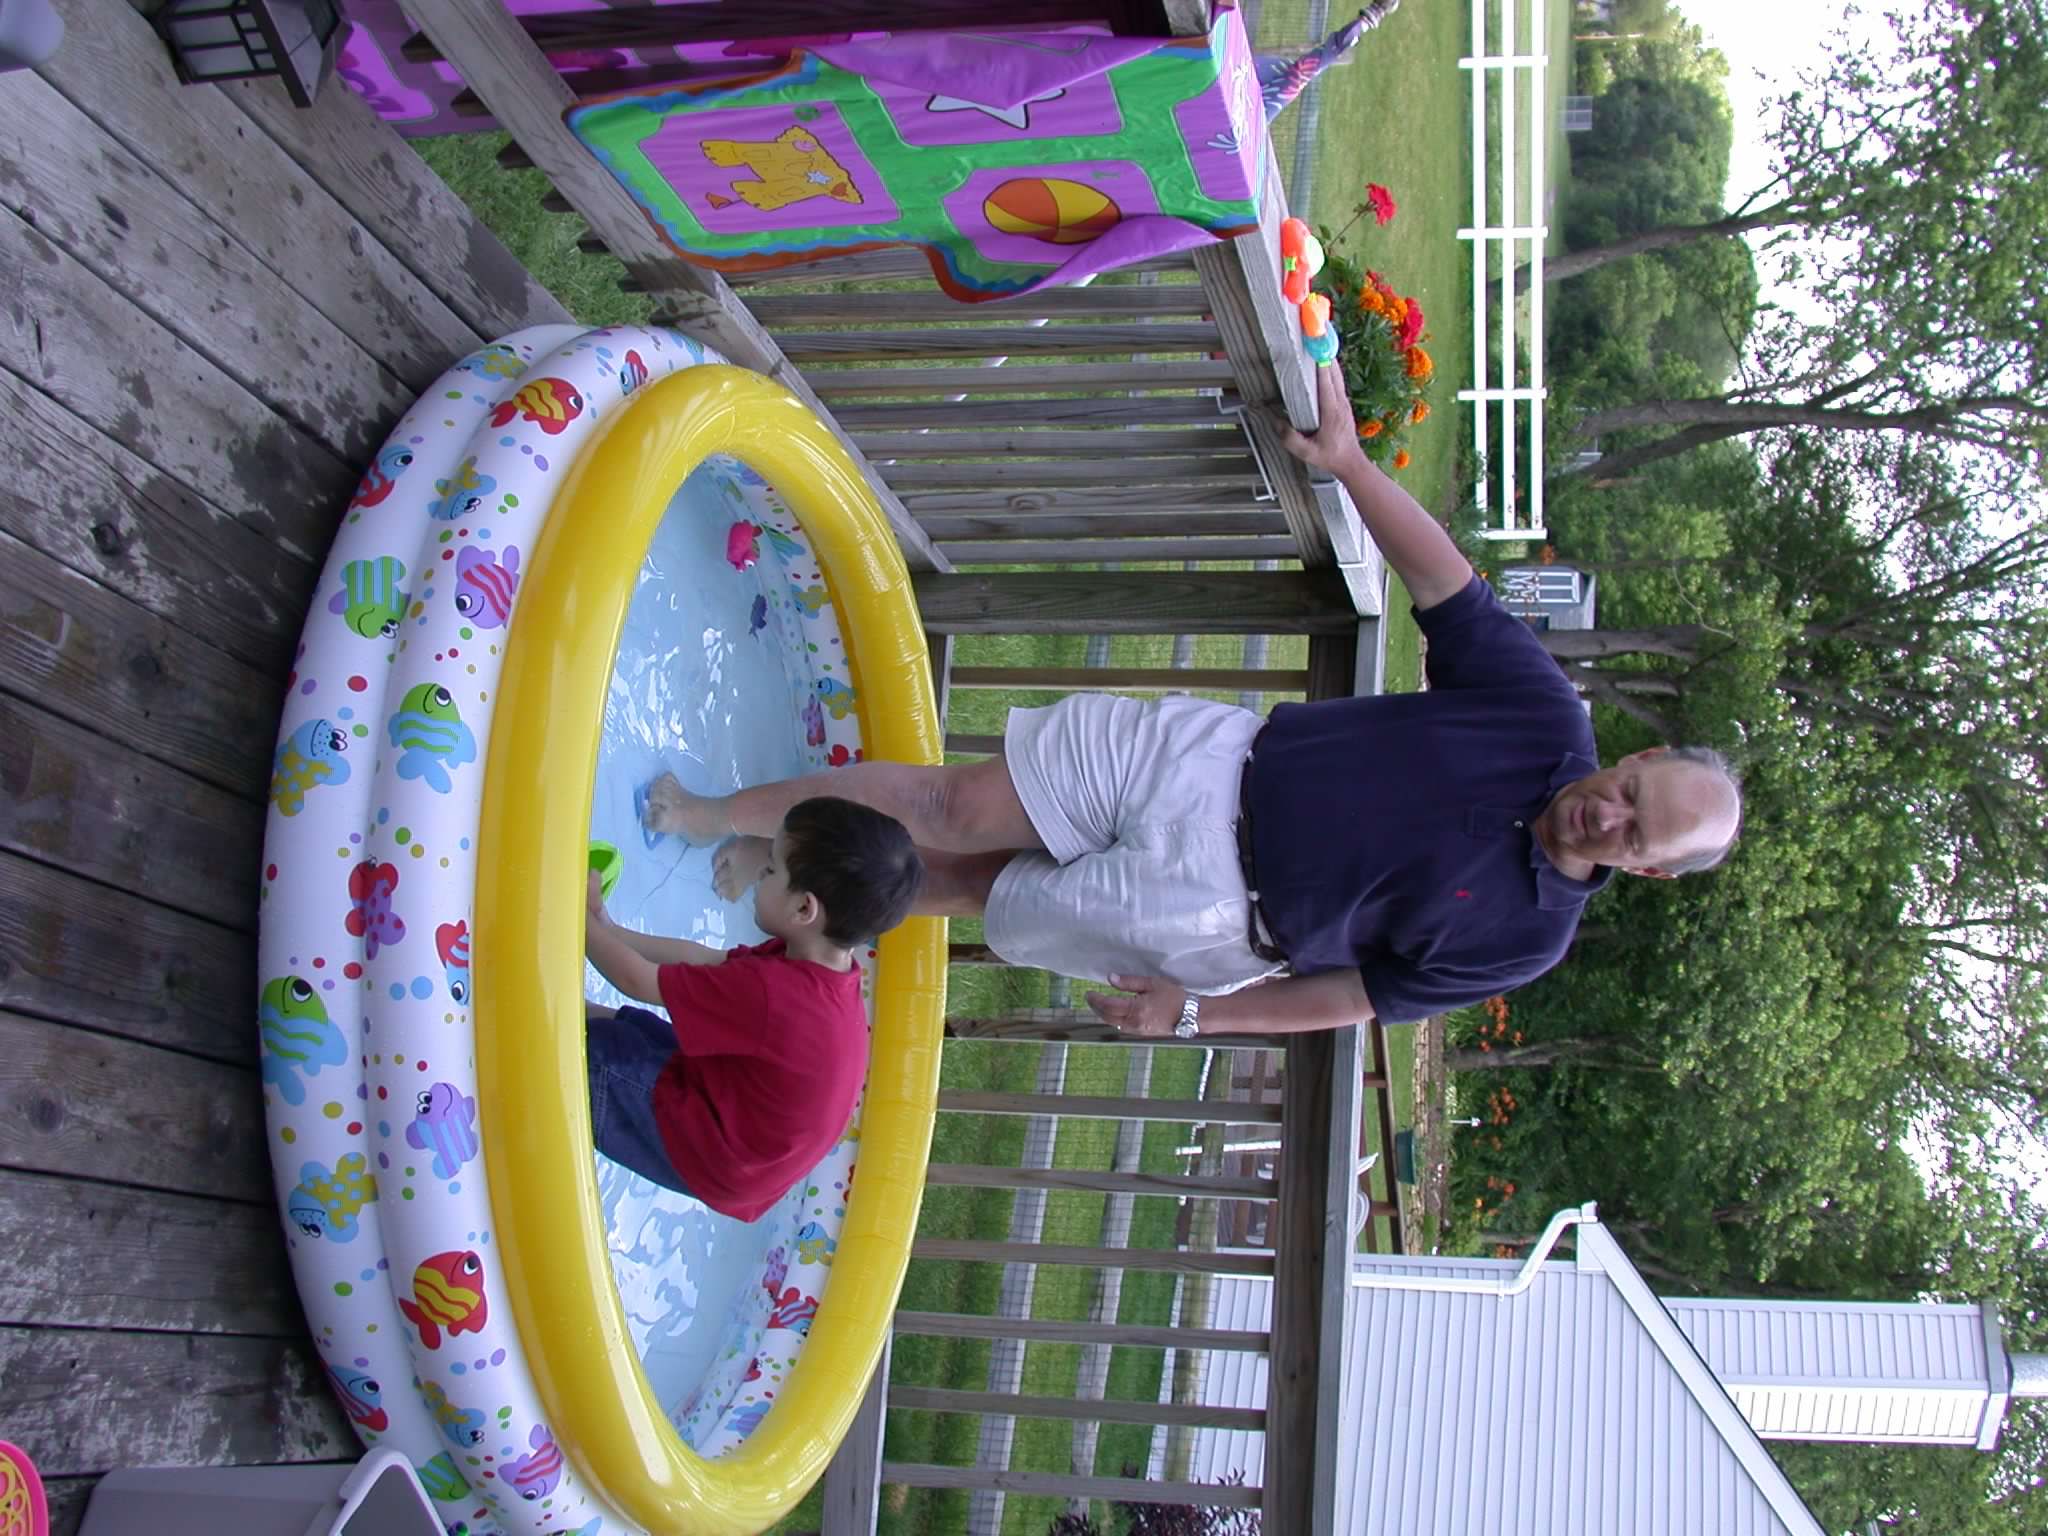 Don and F3 play in a small pool